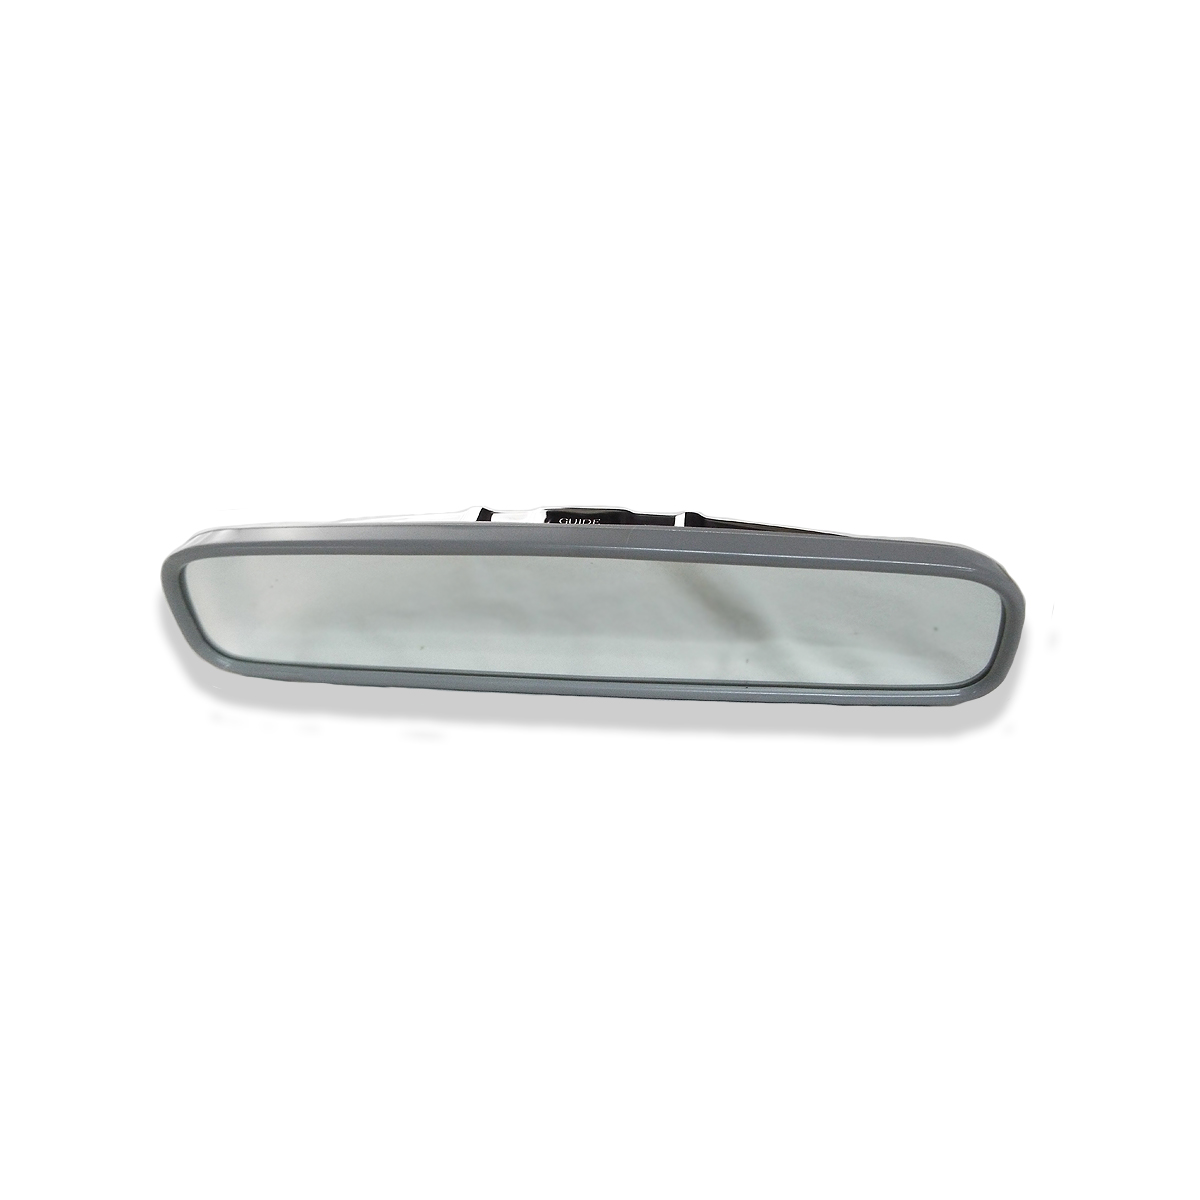 1965-1971 Mirror Inside Day-Night Style Chevrolet and GMC Pickup Truck